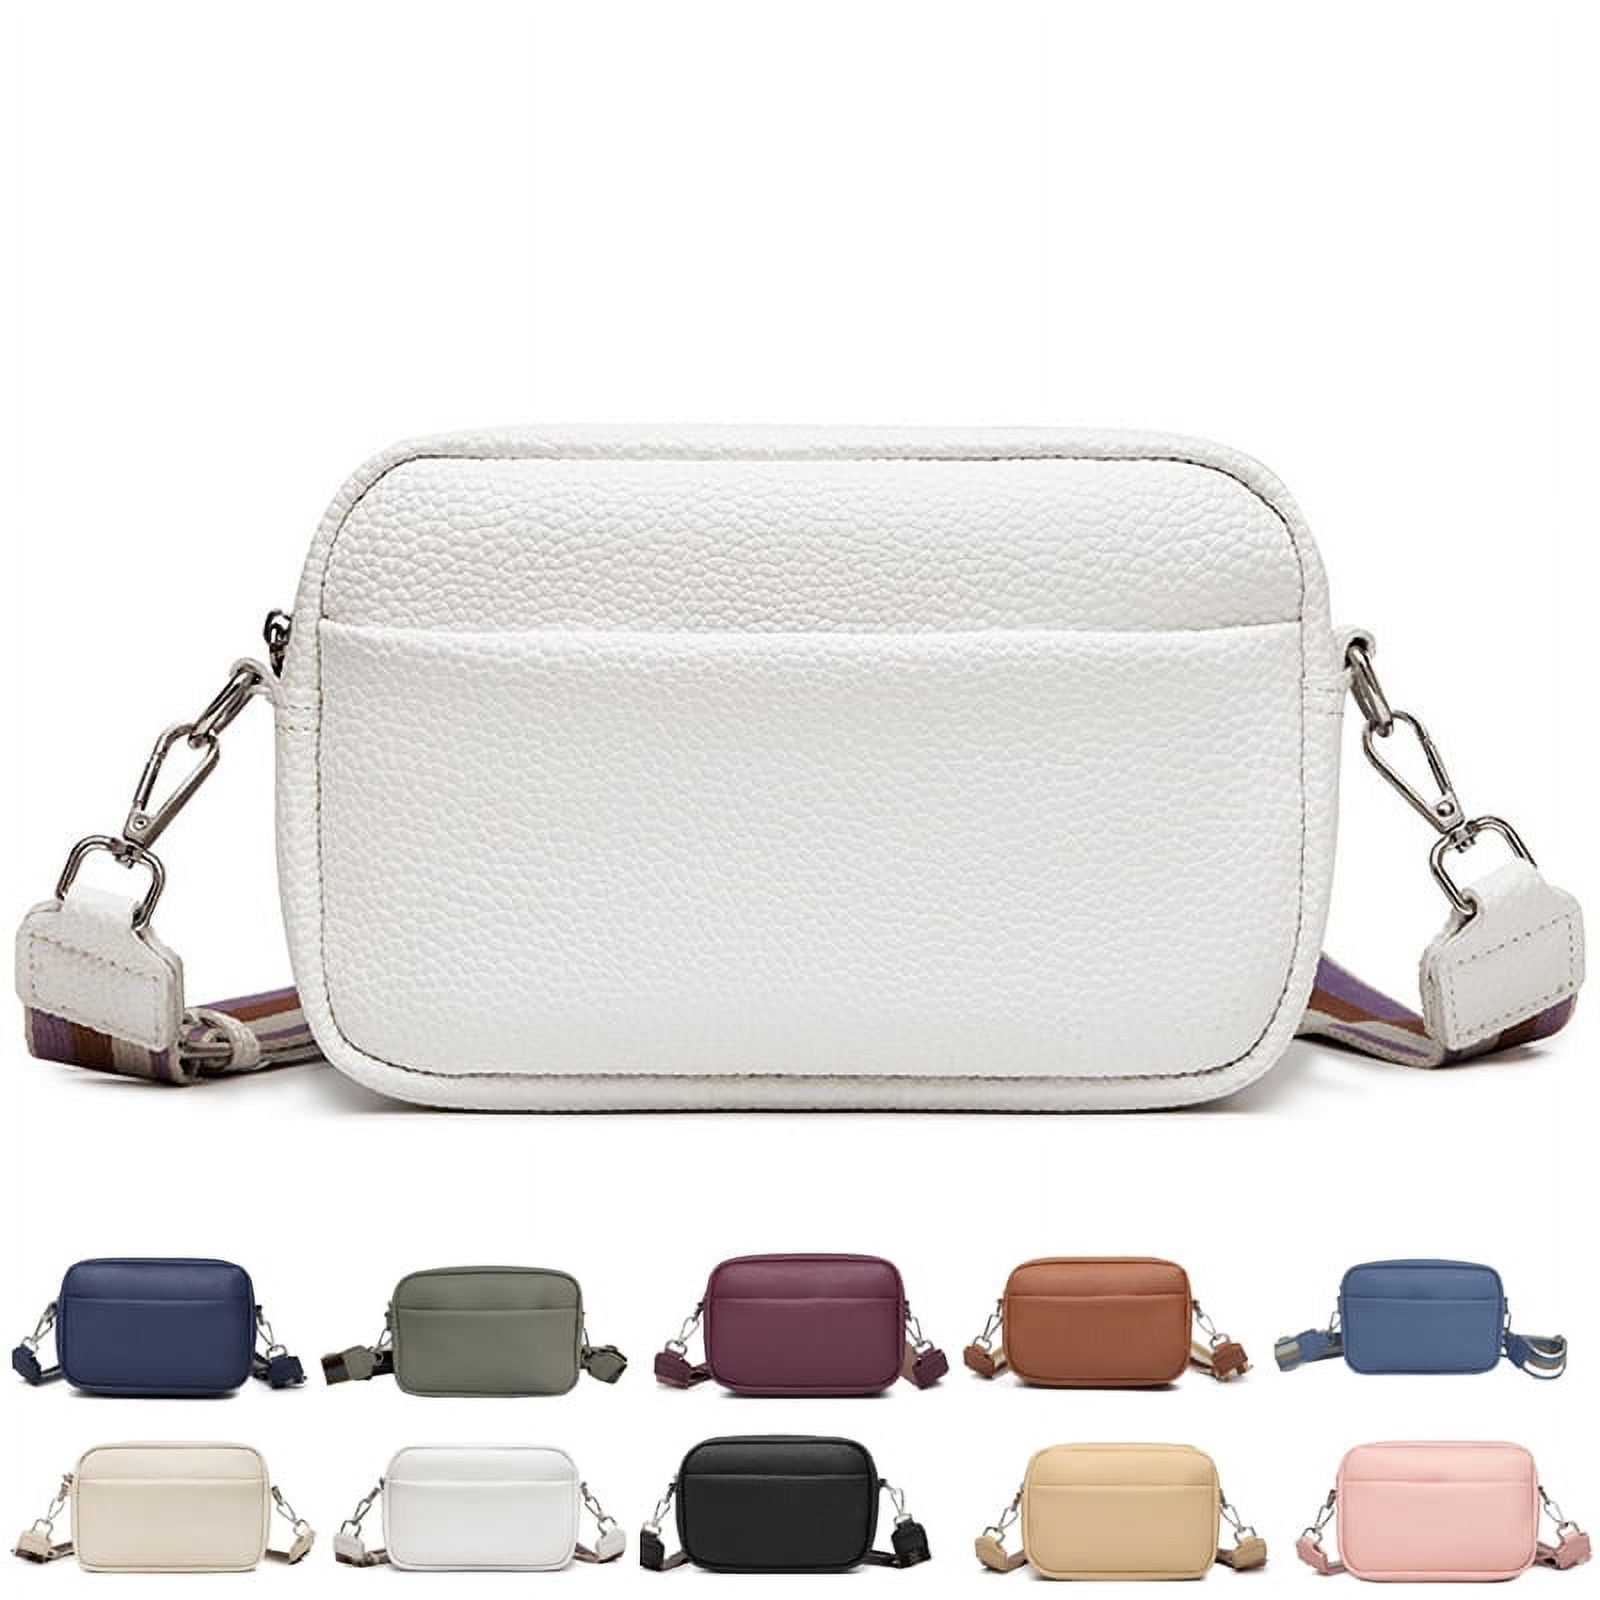 Buy Double Compartment Large Flap Over Crossbody Bag White at Amazon.in